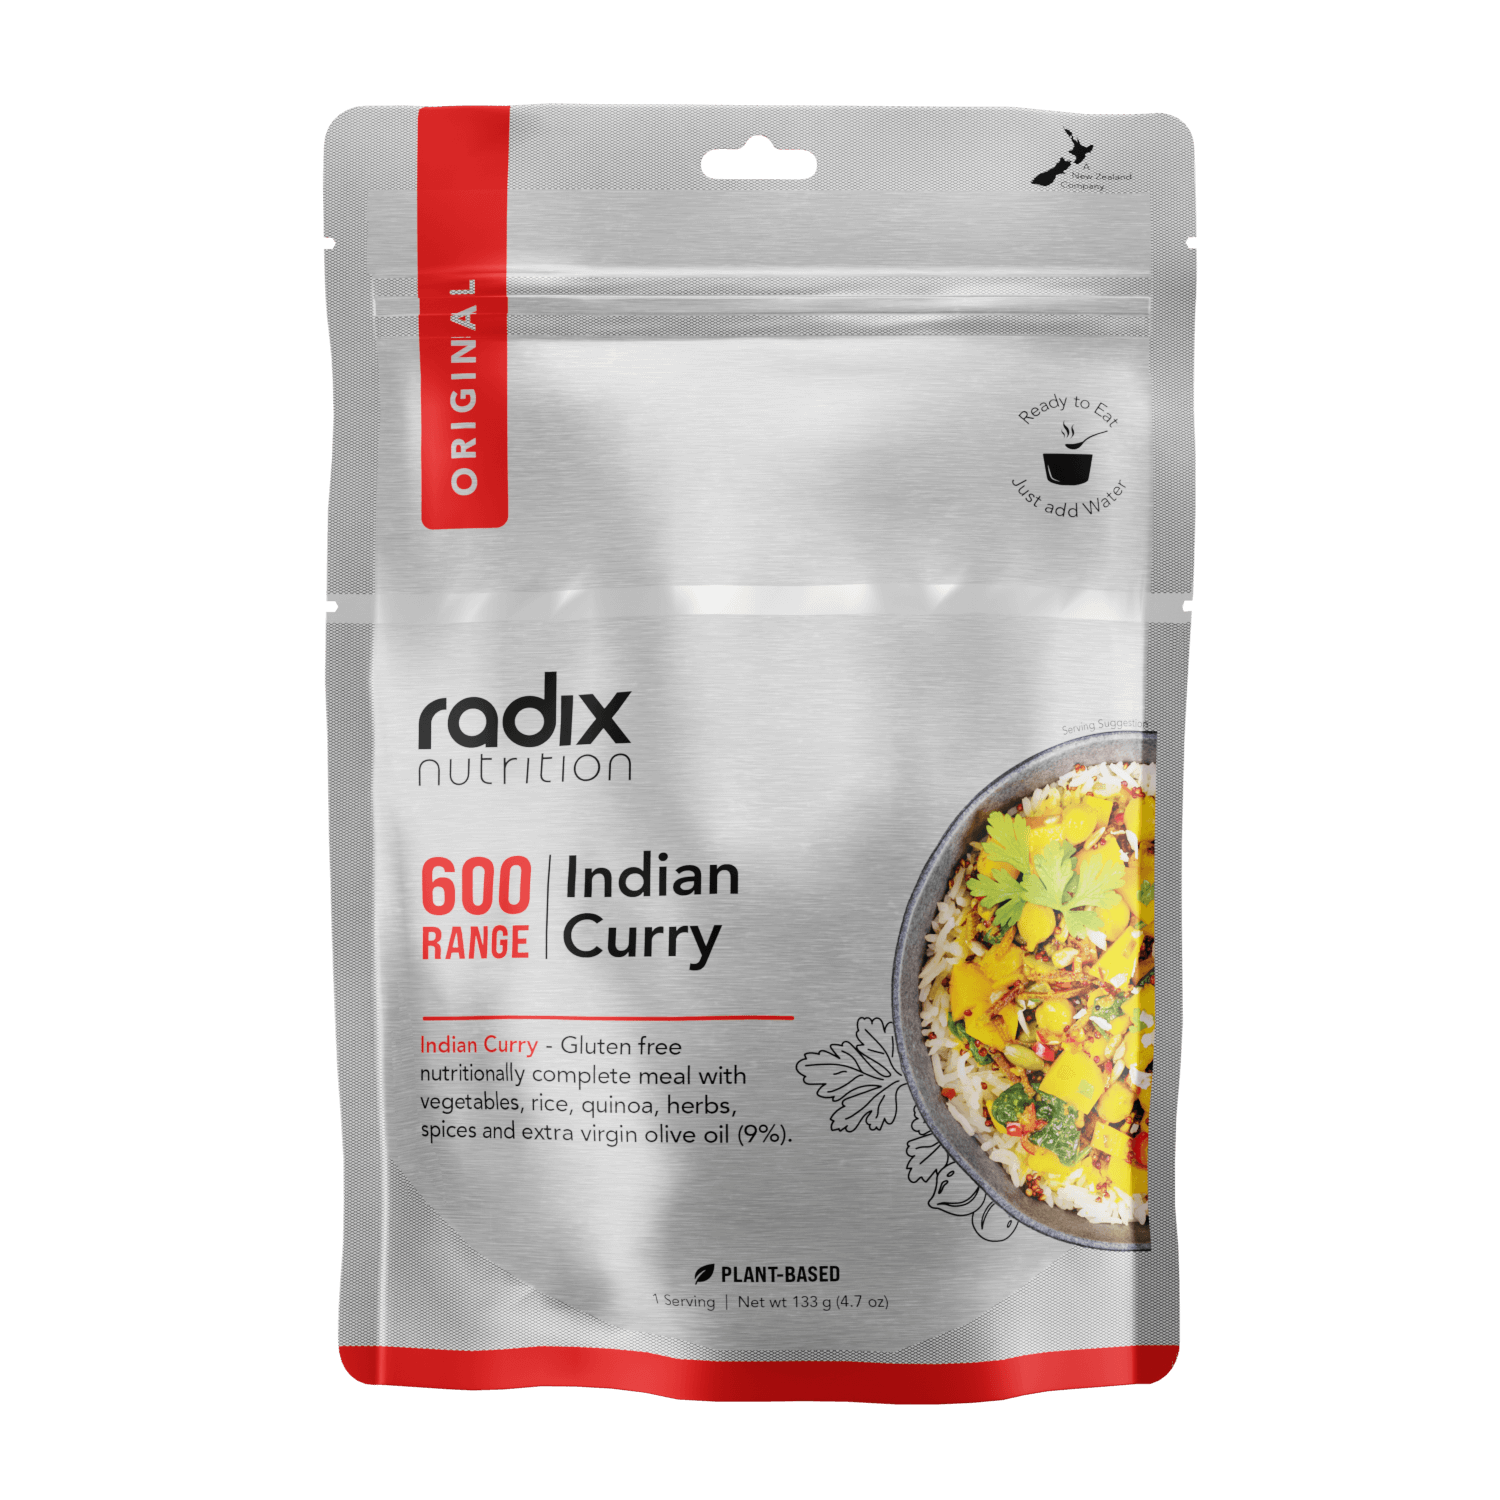 600 Kcal (1 Serving) / Indian Curry